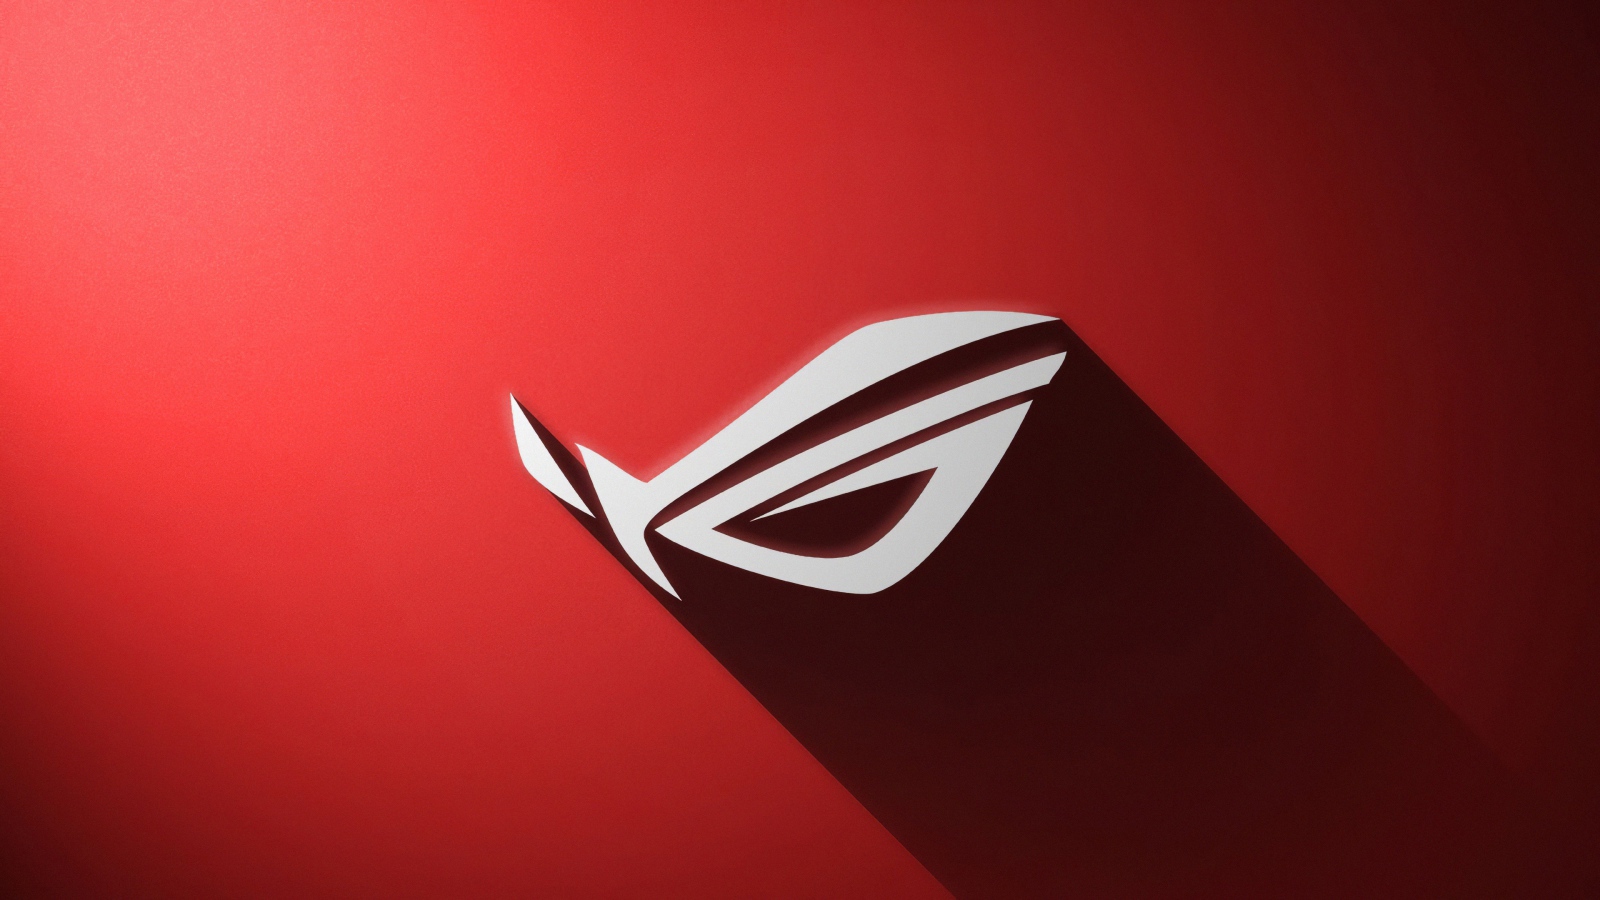 ASUS ROG logo on a red background